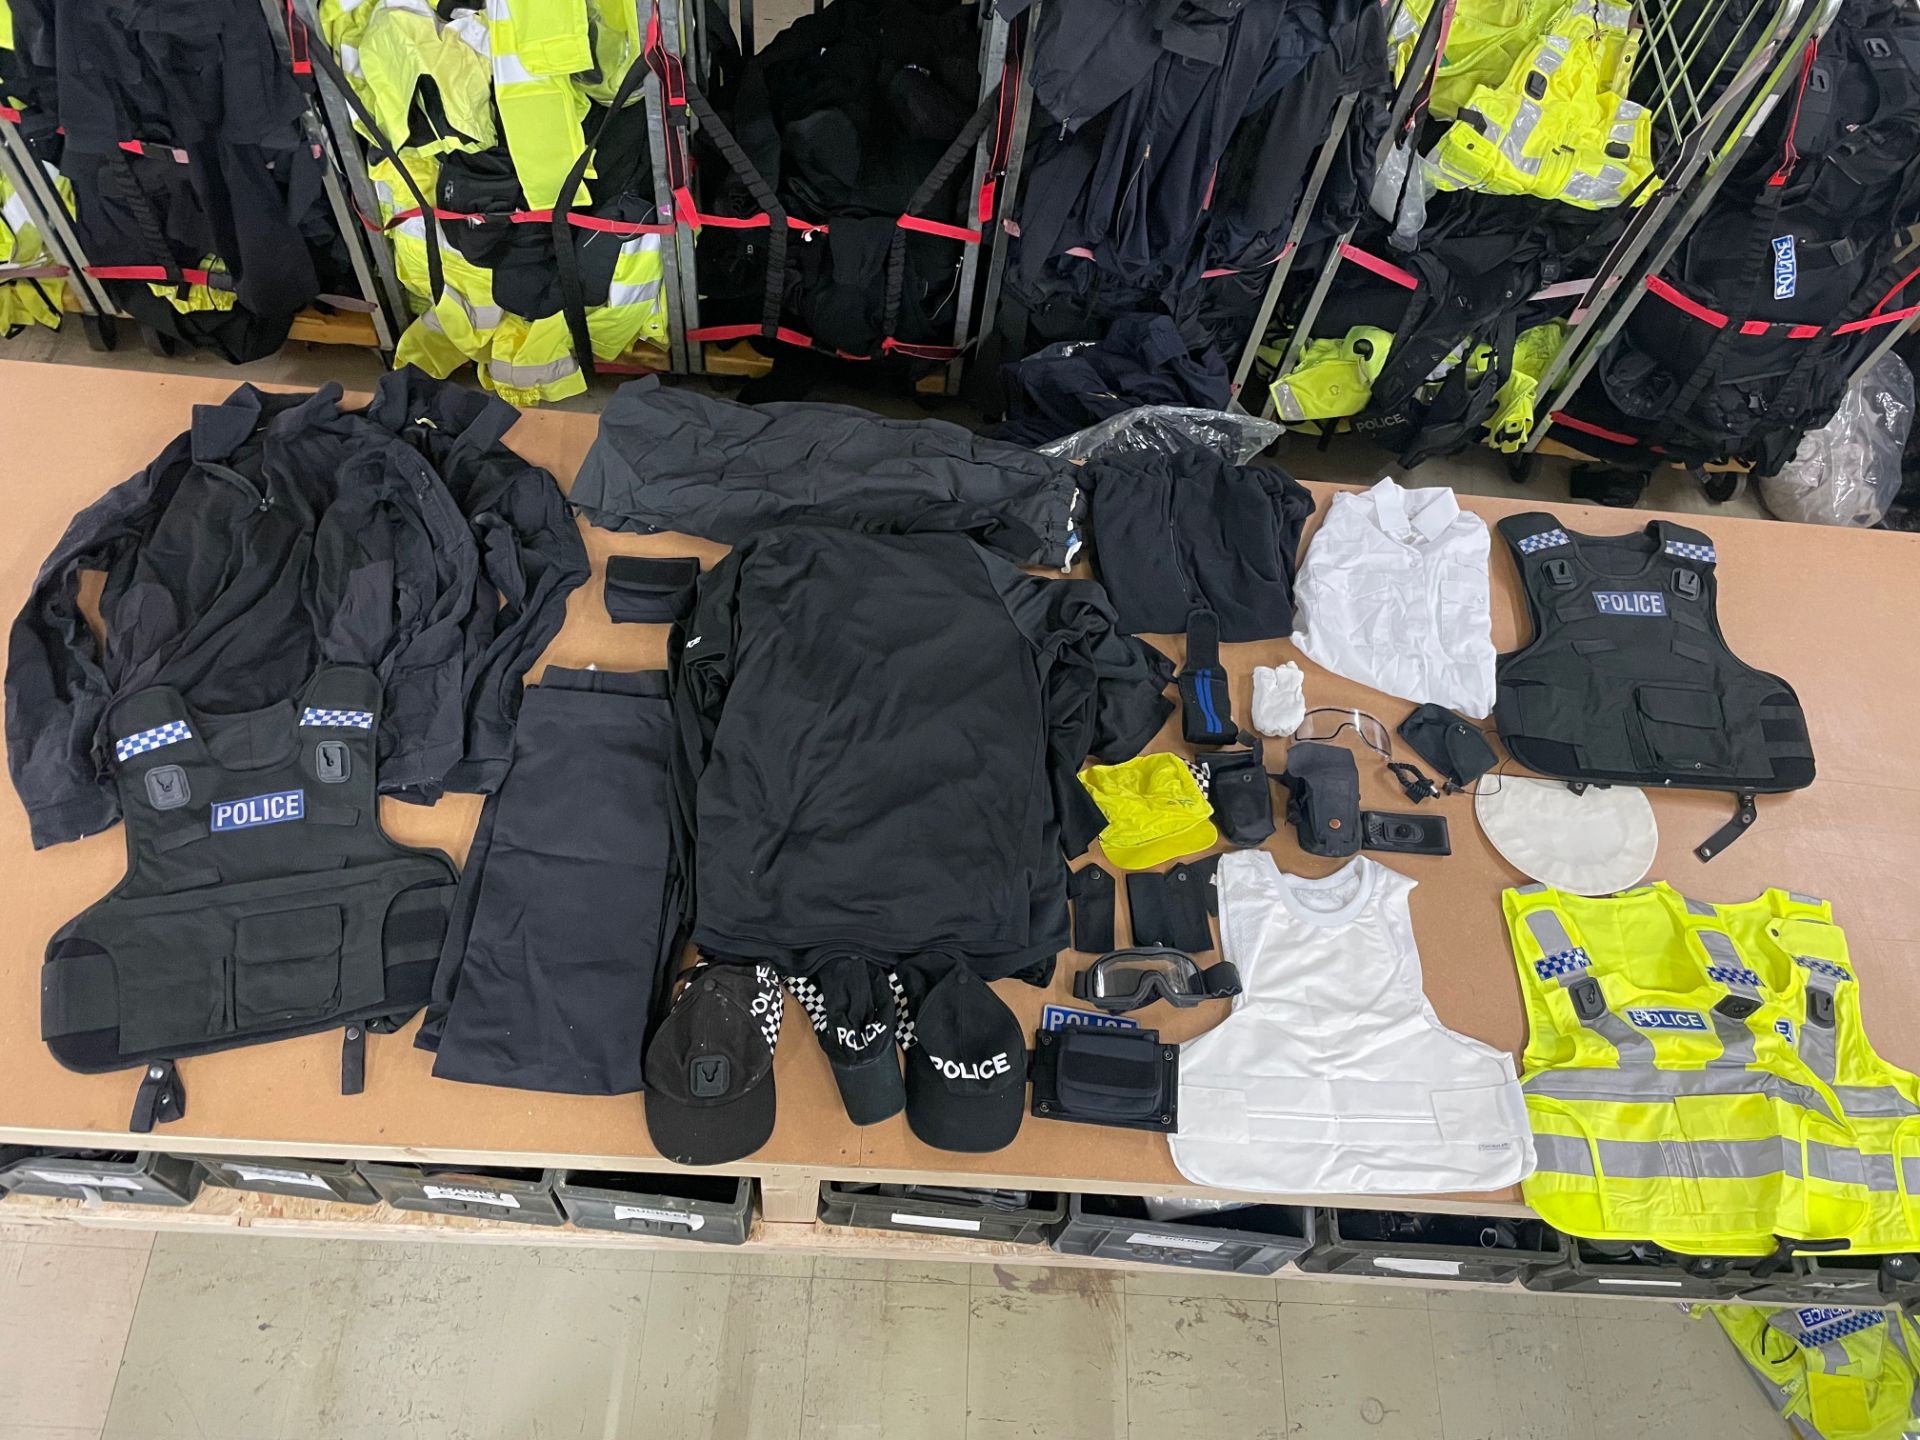 5 X BAGS EX POLICE CLOTHING & ACCESSORIES - RRP £1375.00 - Image 10 of 12